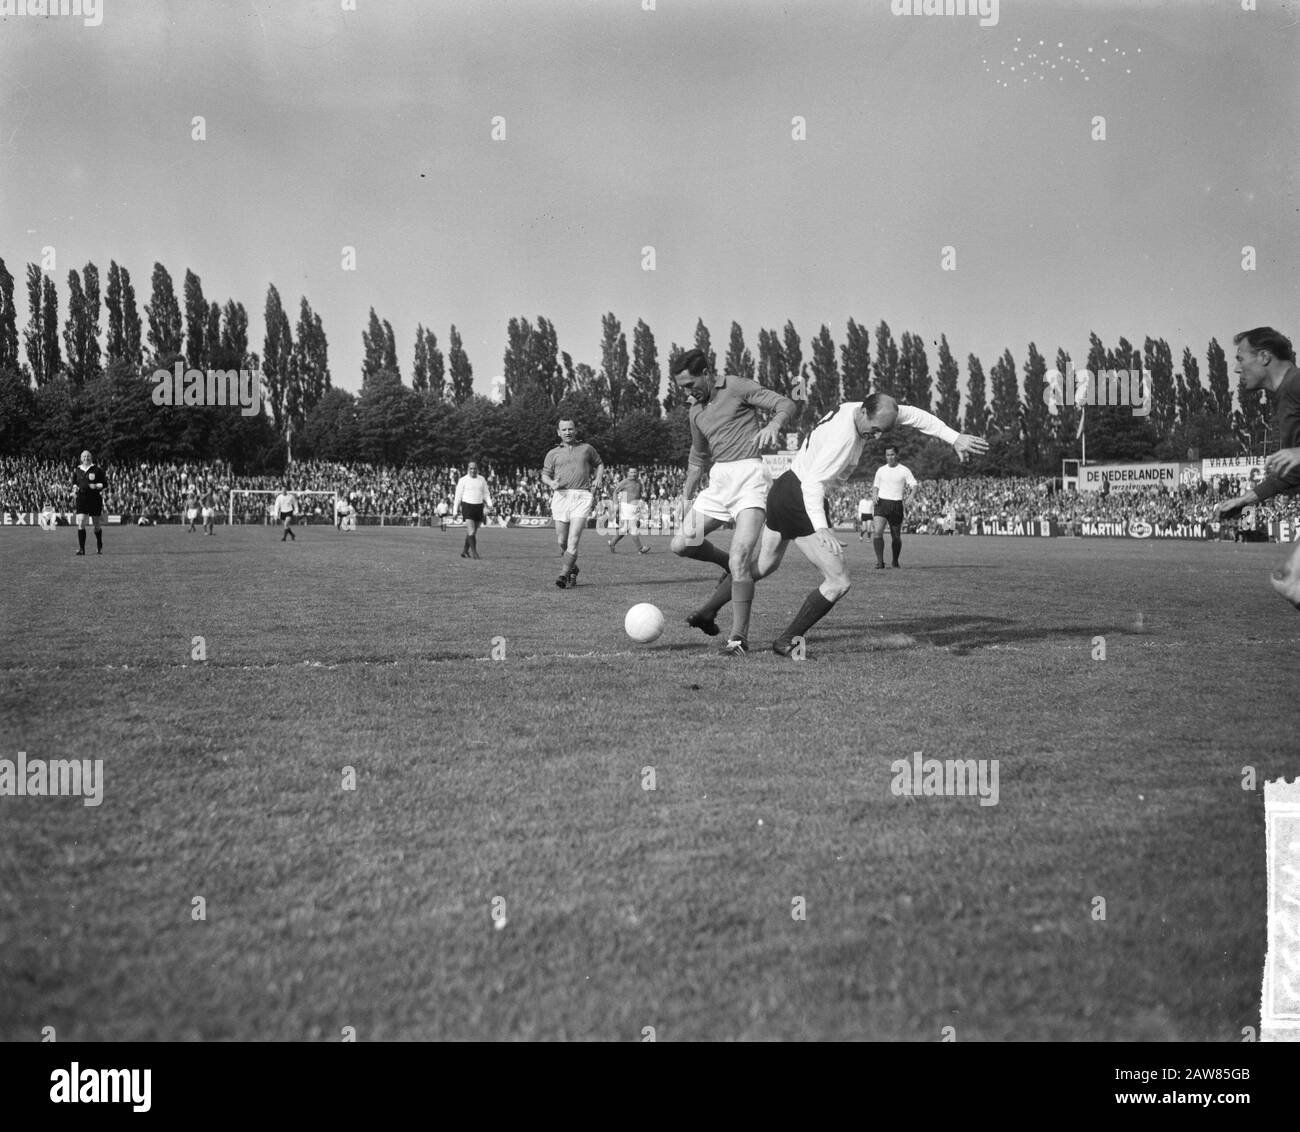 Anciens internationaux contre l'Angleterre 6-2 Pays-Bas, Faas Wilkes in duel with Barnes Date: 23 mai 1965 lieu: Royaume-Uni mots clés: International, équipe, sport, football Nom: Wilkes, Servaas Banque D'Images